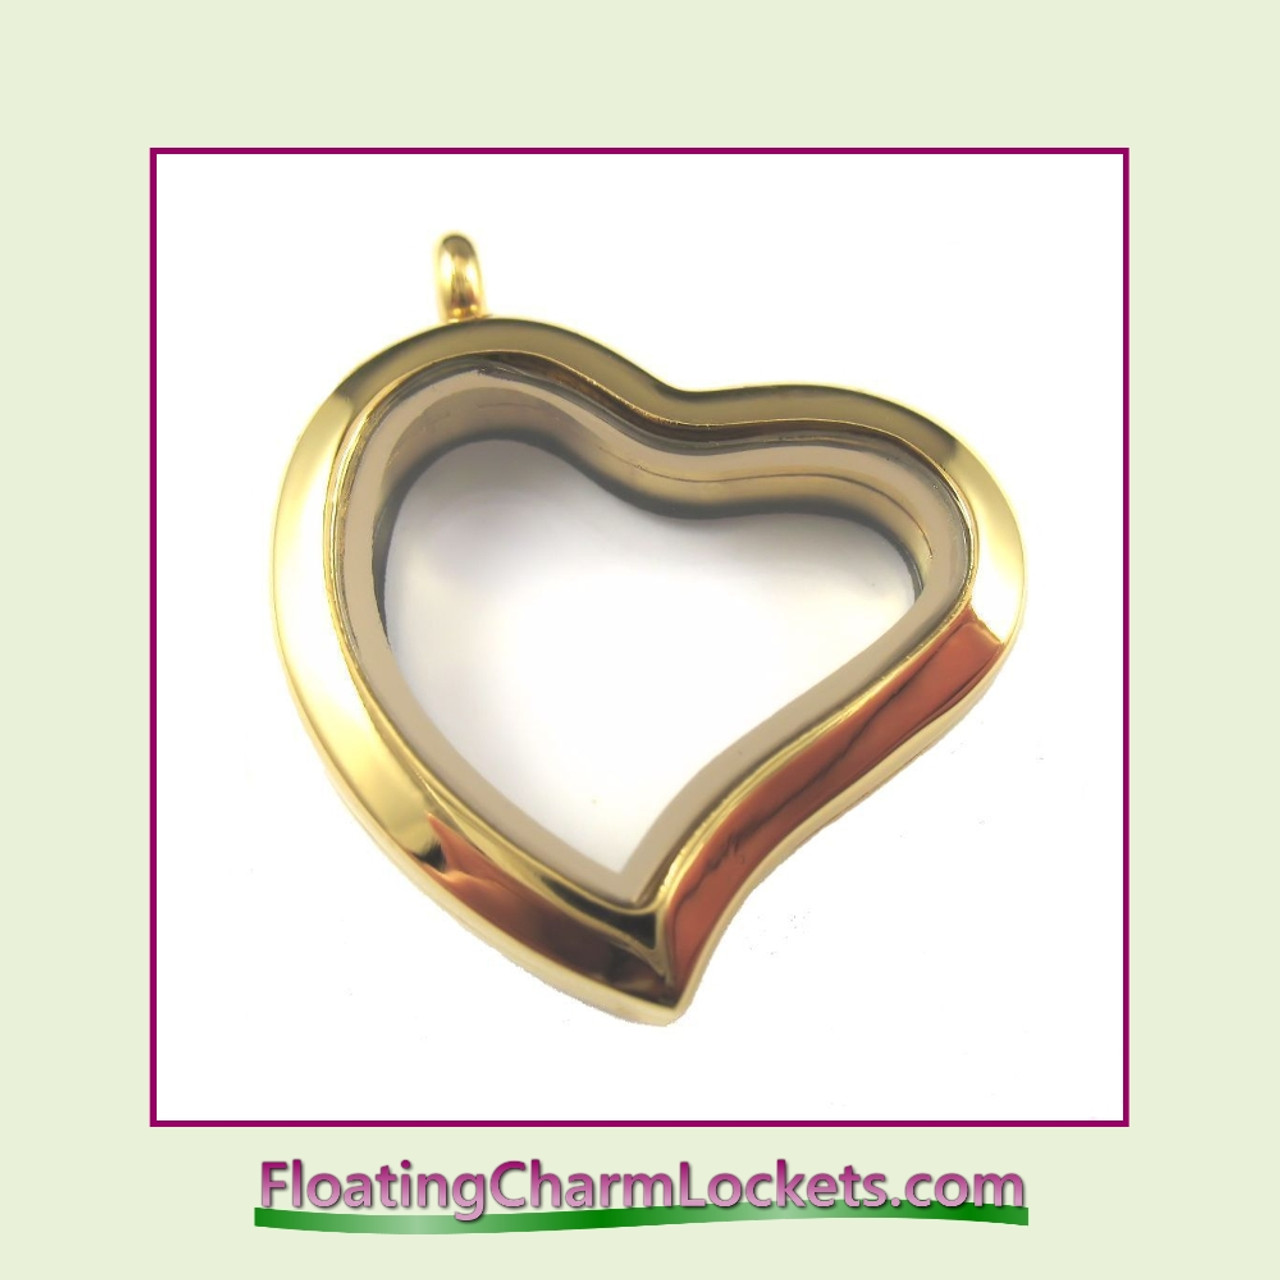 Plain Gold Curved Heart Stainless Steel Floating Charm Locket